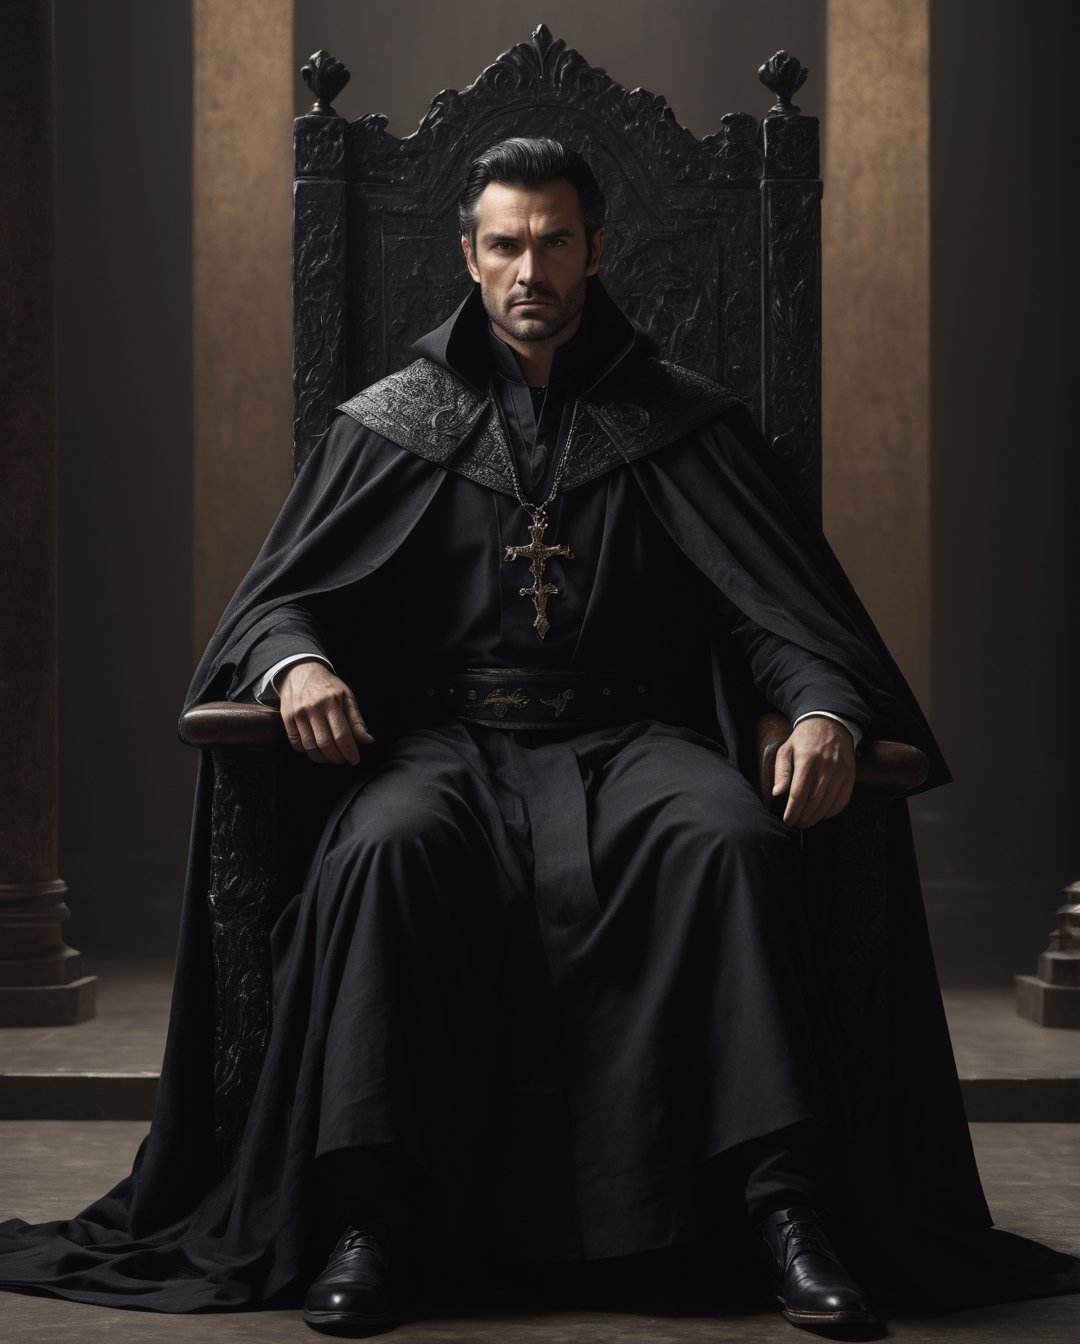 raw realistic full body  potarait of raw cinematic potrait of a old doctor 35 years old King, dark  hair, handsome, dark hair , black eyes, wearing black cloak, , evil look in eyes savage gaze, looking at camera, dark throne room, sitting on throne in dominant style,cinemtic aesthetic,by Alexander Kanoldt, Artstation, cinematic portrait, big cheekbones, diego dayer, with round face, realistic - n 9, artist unknown, ann stokes,sharpie, cinemtic lookcinemtic look , (((((((grainy cinematic,  godlyphoto r3al,detailmaster2,aesthetic portrait, cinematic colors, earthy , moody,  )))))))